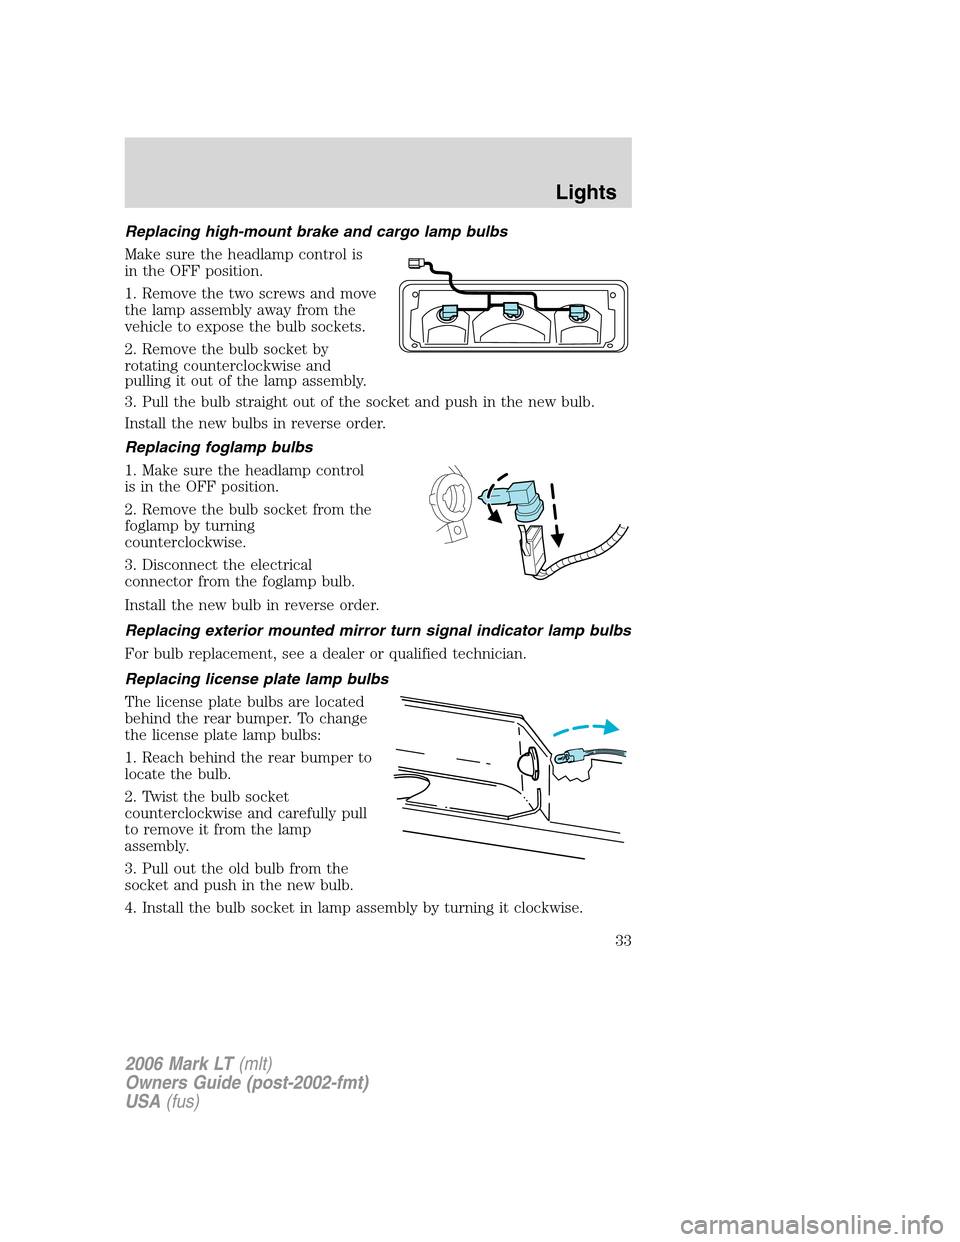 LINCOLN MARK LT 2006  Owners Manual Replacing high-mount brake and cargo lamp bulbs
Make sure the headlamp control is
in the OFF position.
1. Remove the two screws and move
the lamp assembly away from the
vehicle to expose the bulb sock